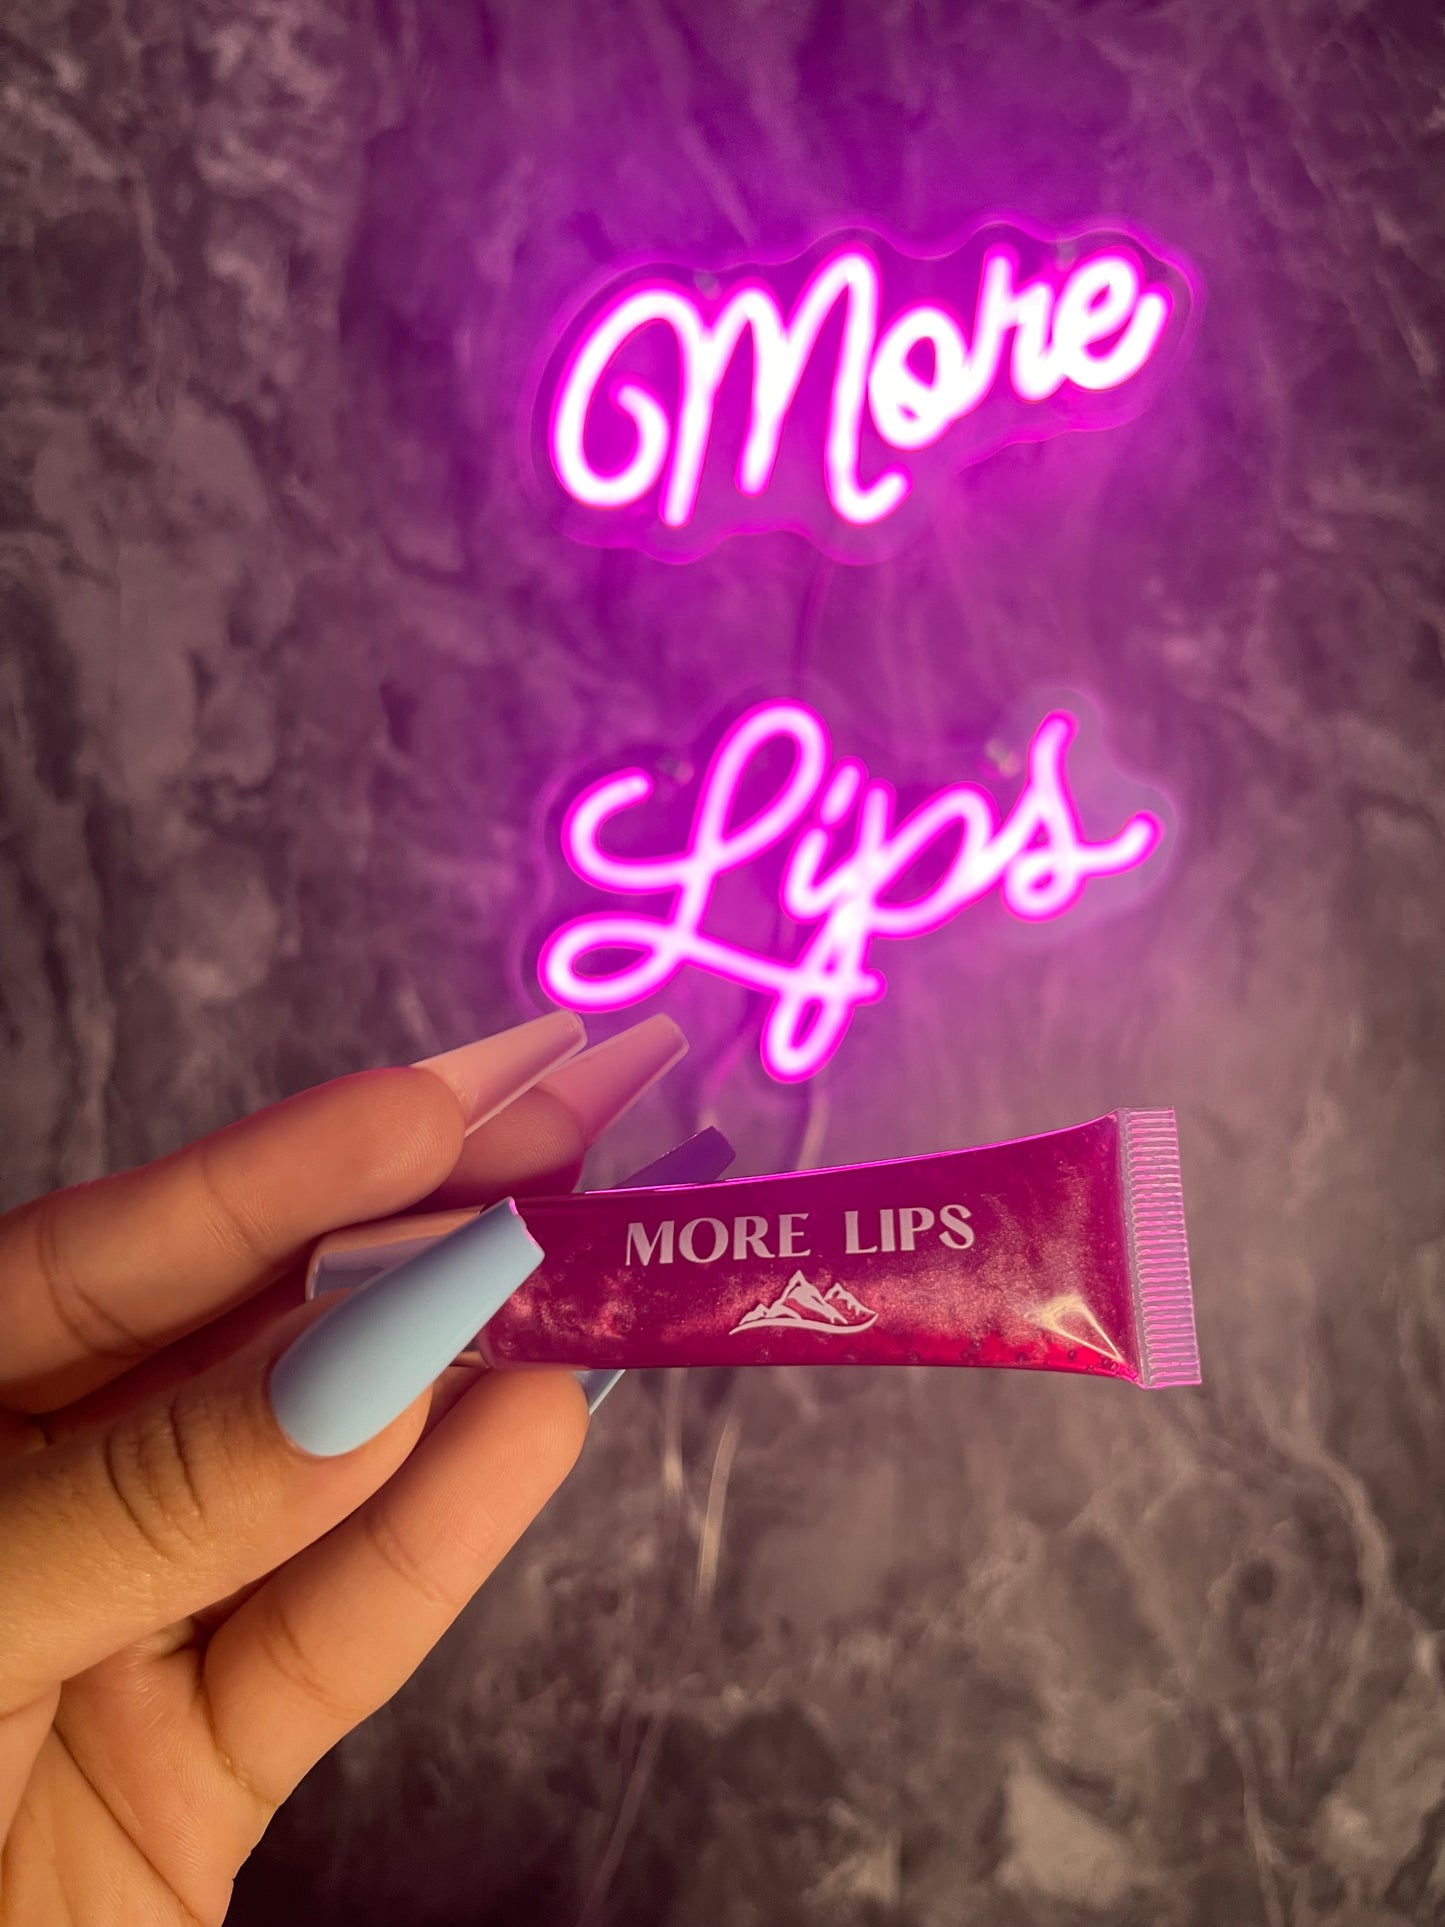 Image of More Lips Vegan Lip Gloss in various shades, showcasing vibrant colors and luscious shine. Cruelty-free and ethical beauty at its best